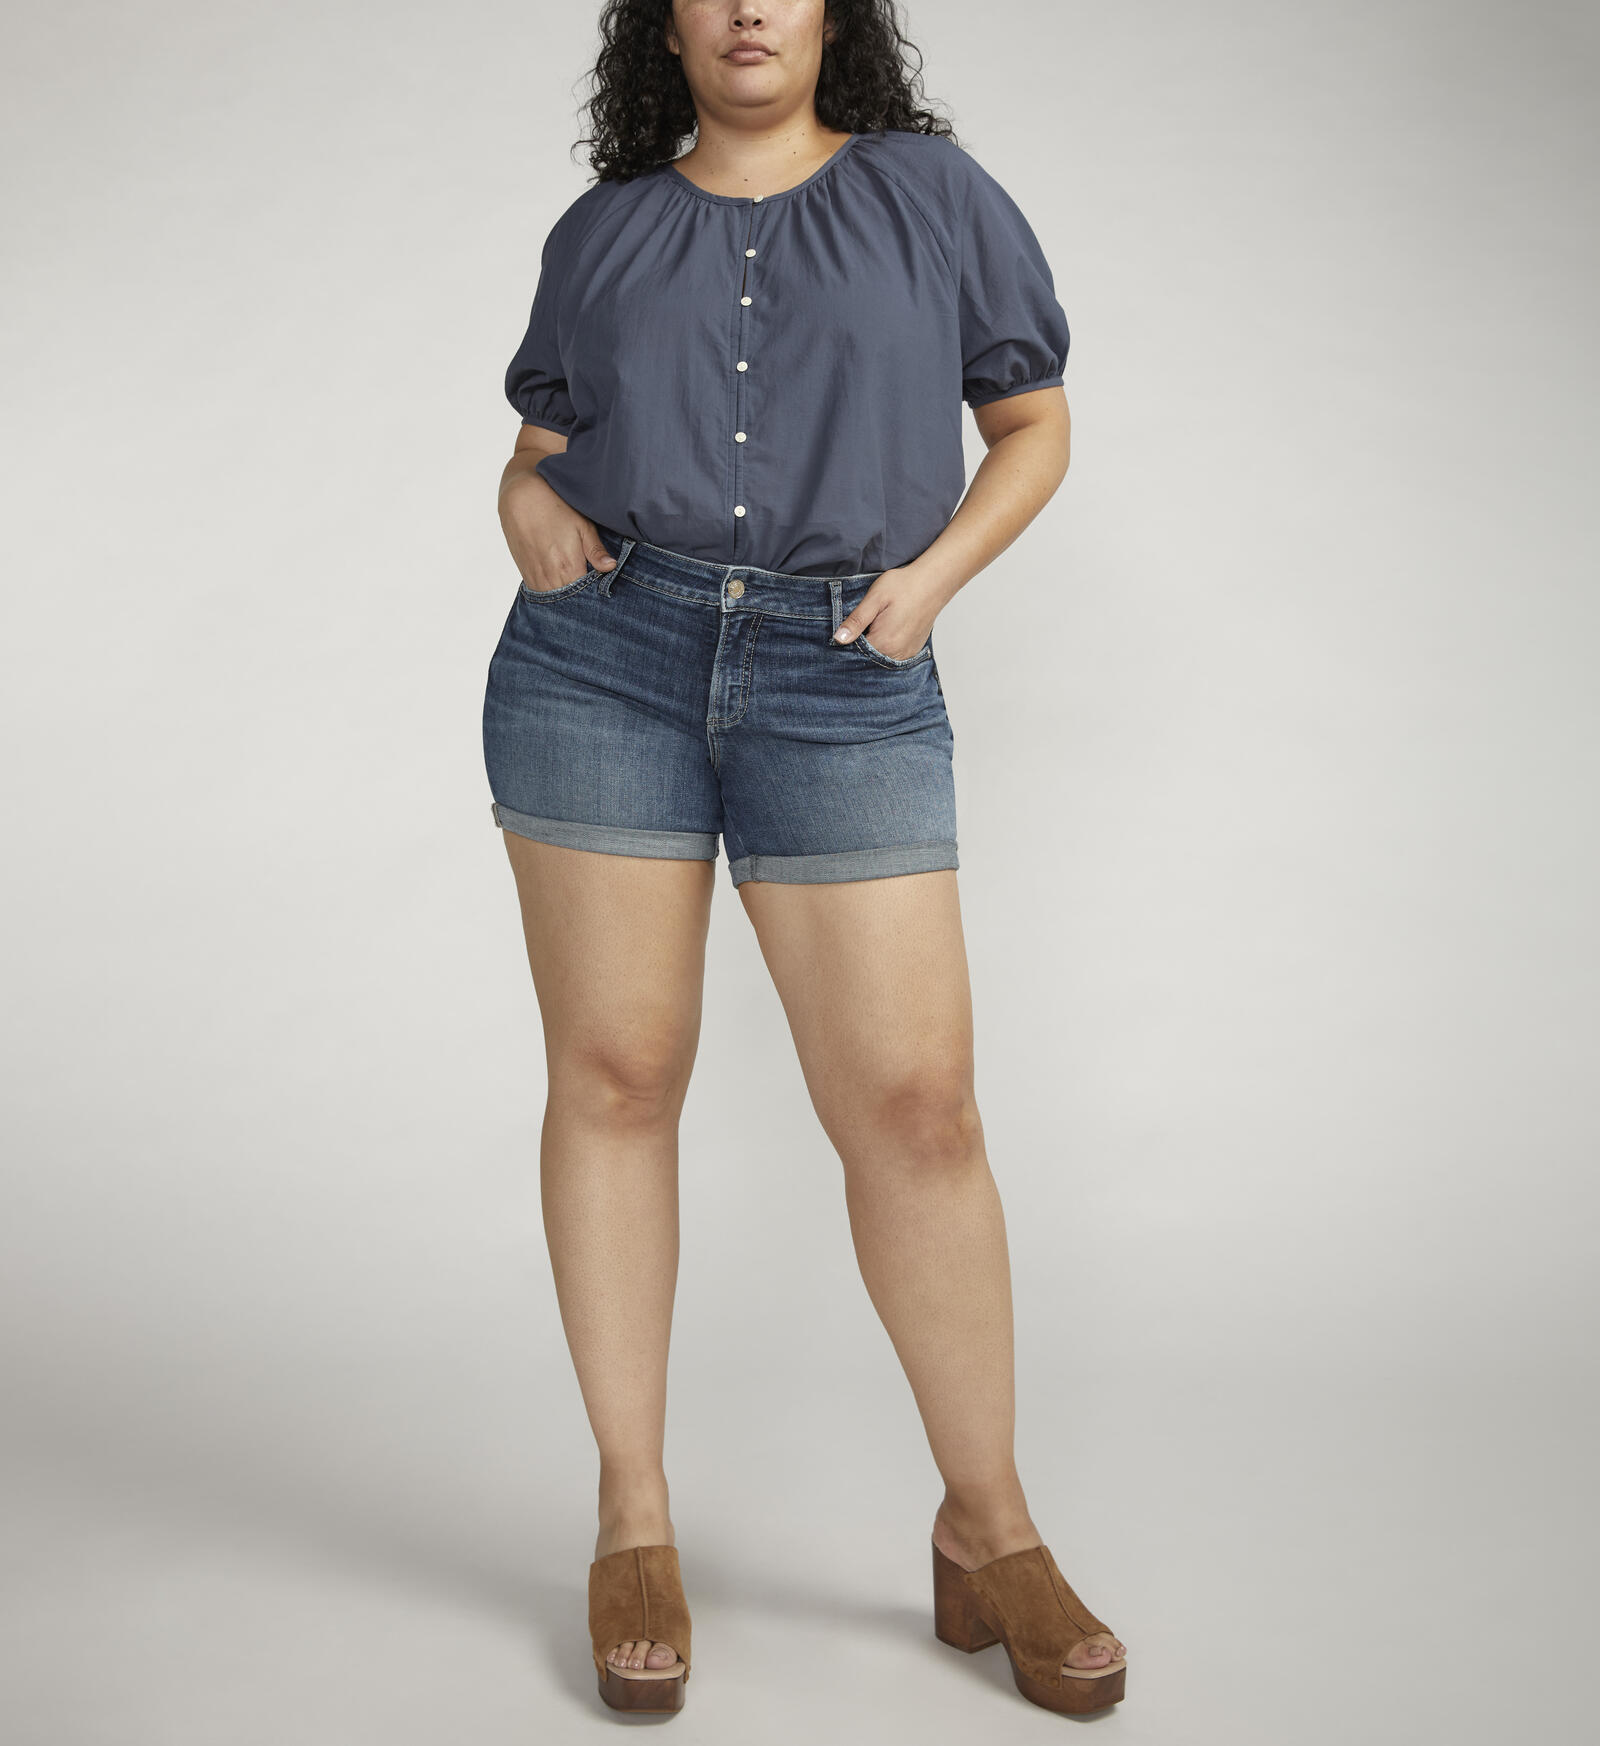 Buy Britt Low Rise Short Plus Size for 40.00 | Silver Jeans US New